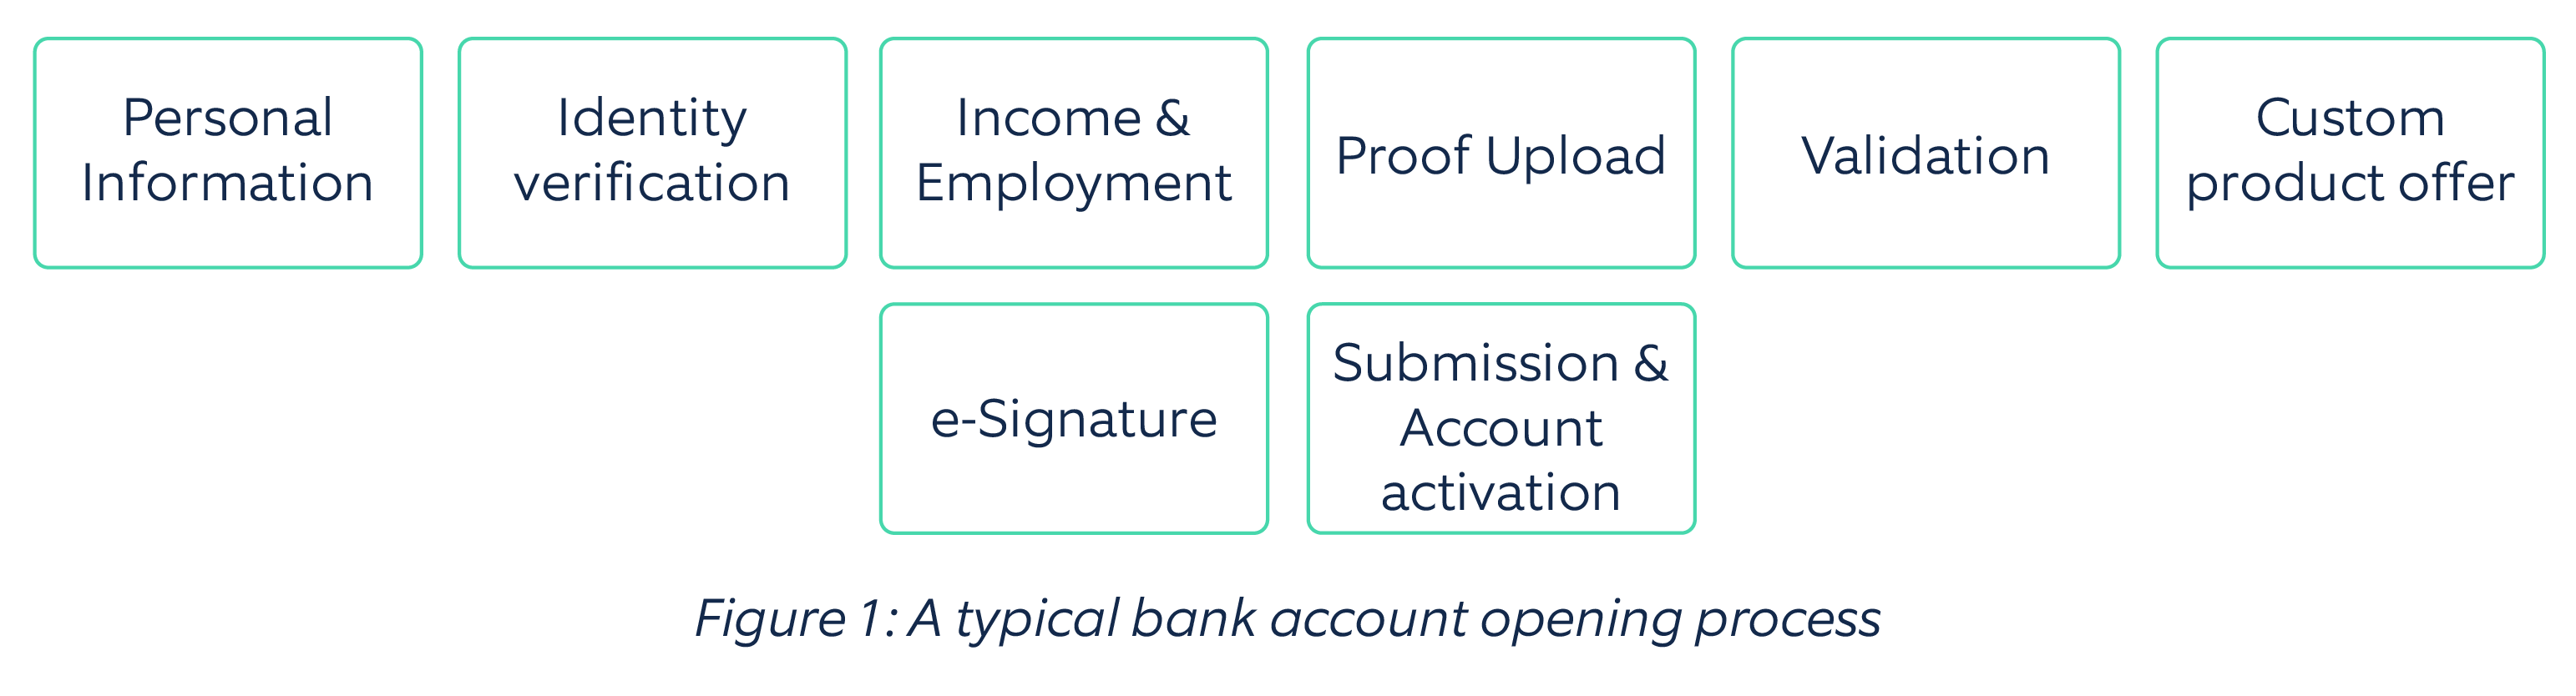 A typical bank account opening process